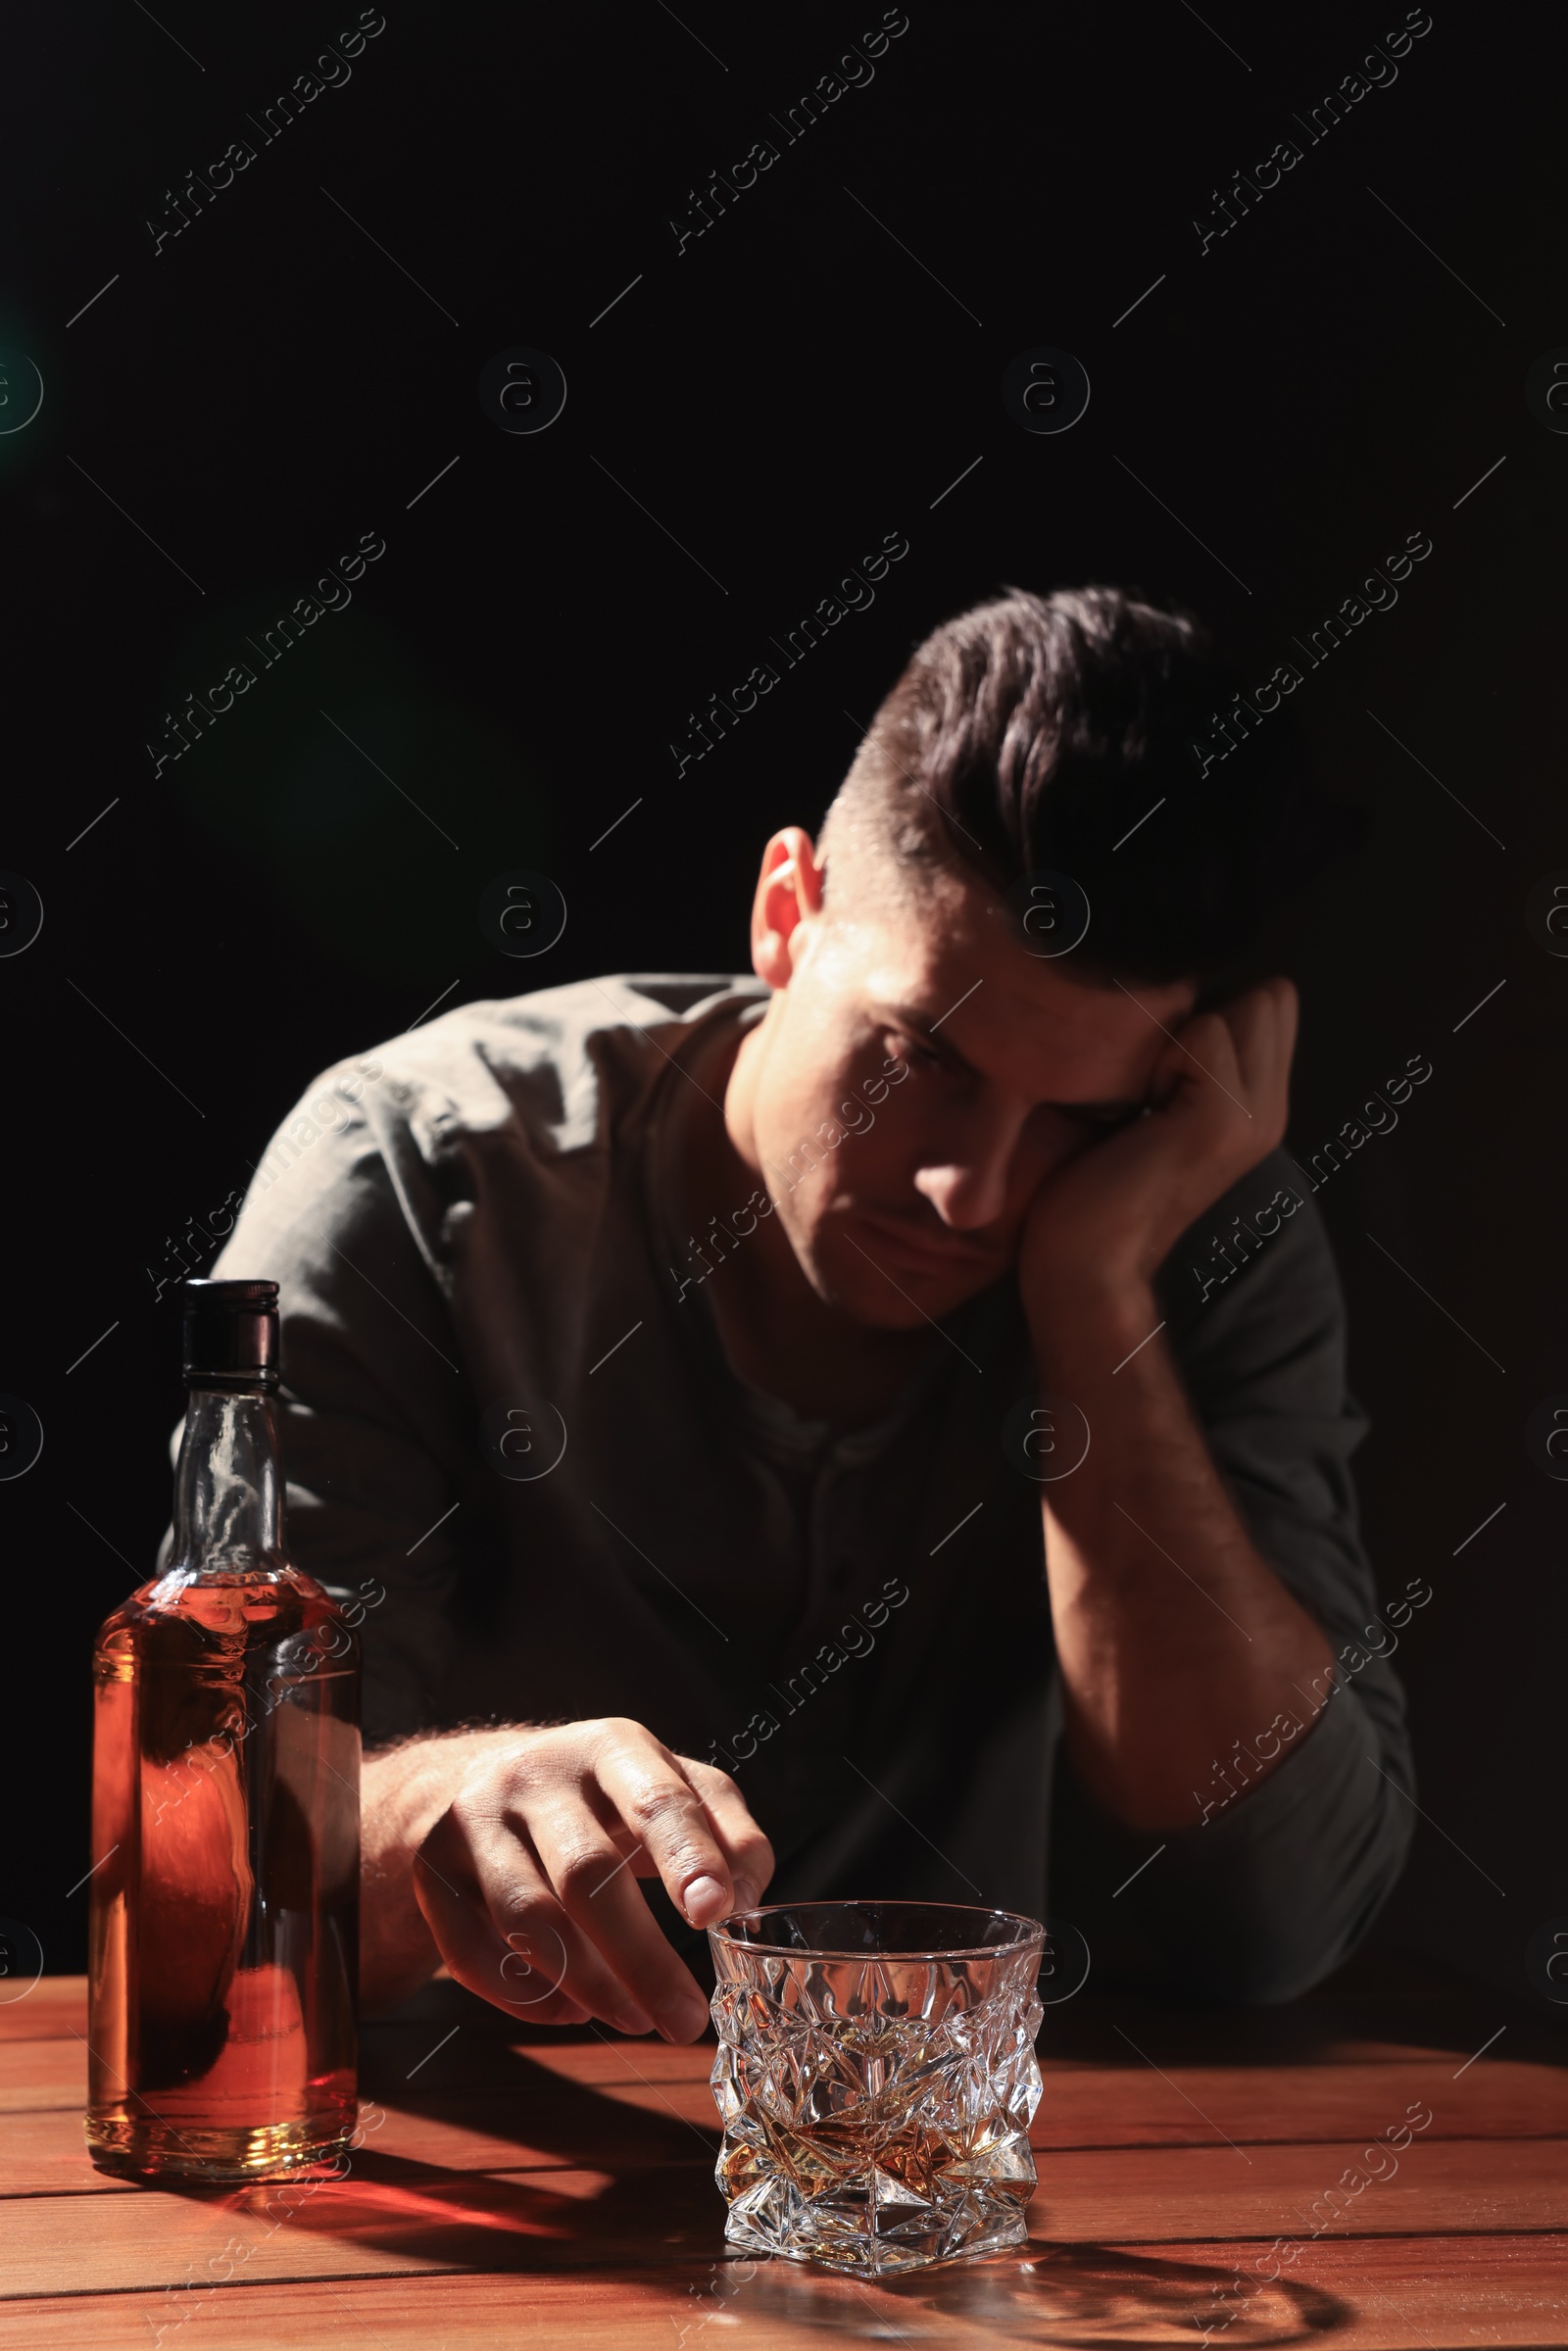 Photo of Addicted man at wooden table against black background, focus on glass of alcoholic drink